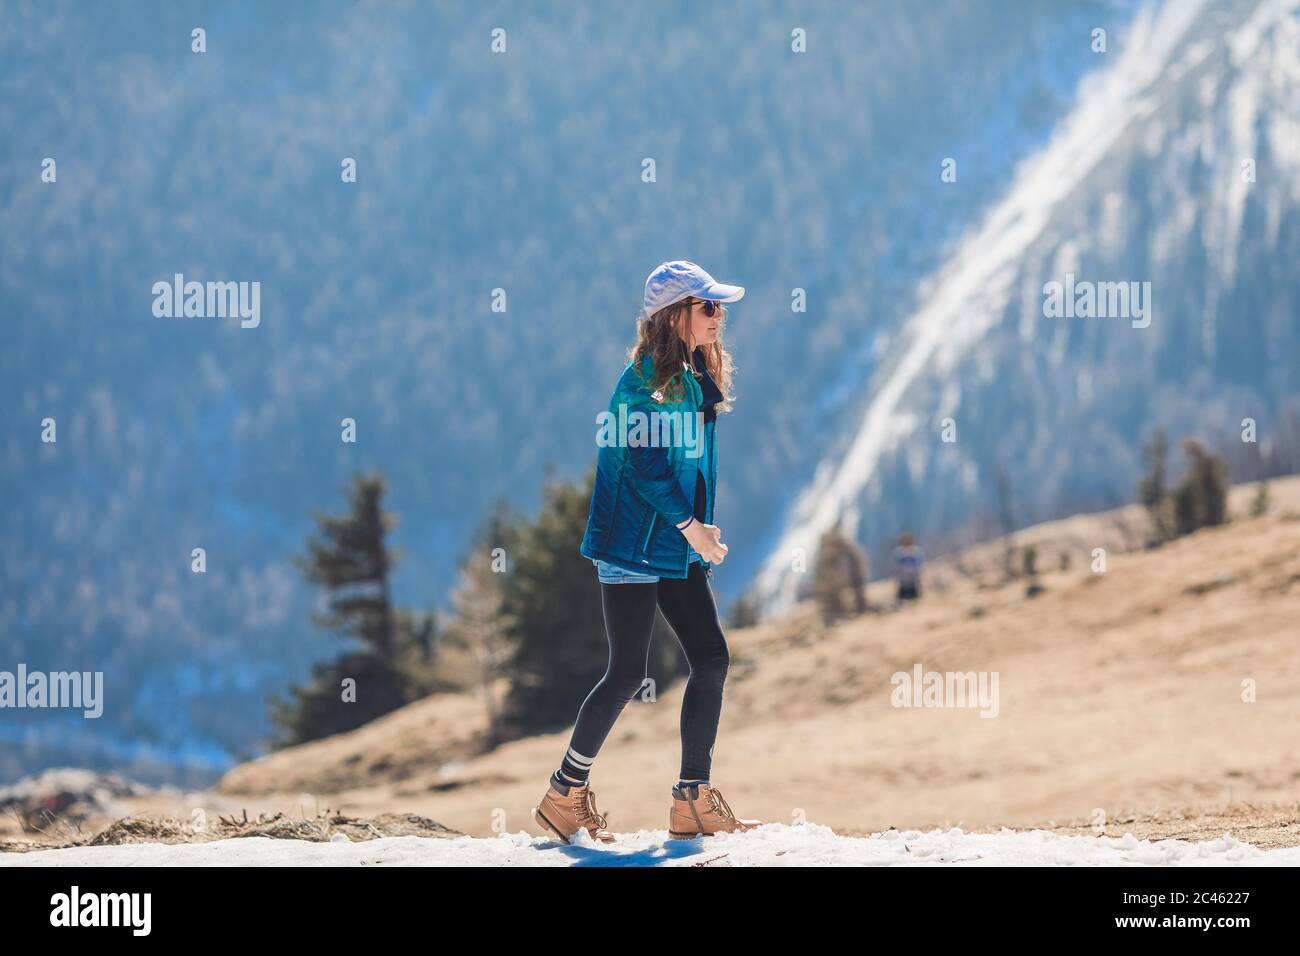 Young girl, tween age, wearing sun cap and sunglasses hiking through melting snow in alpine scenery Stock Photo